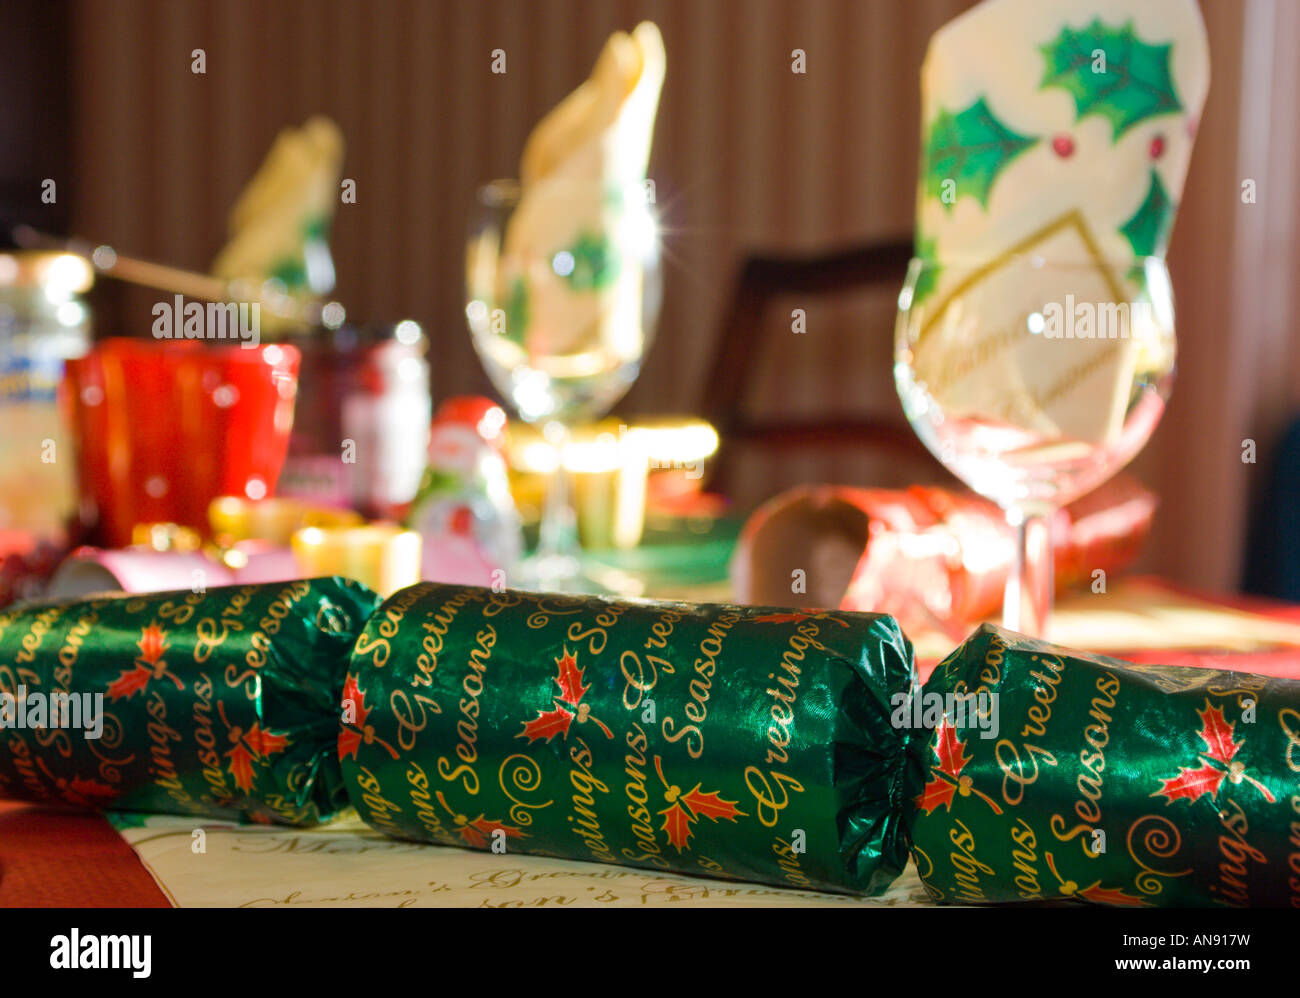 Christmas cracker on table with wine glasses and napkins in background Stock Photo